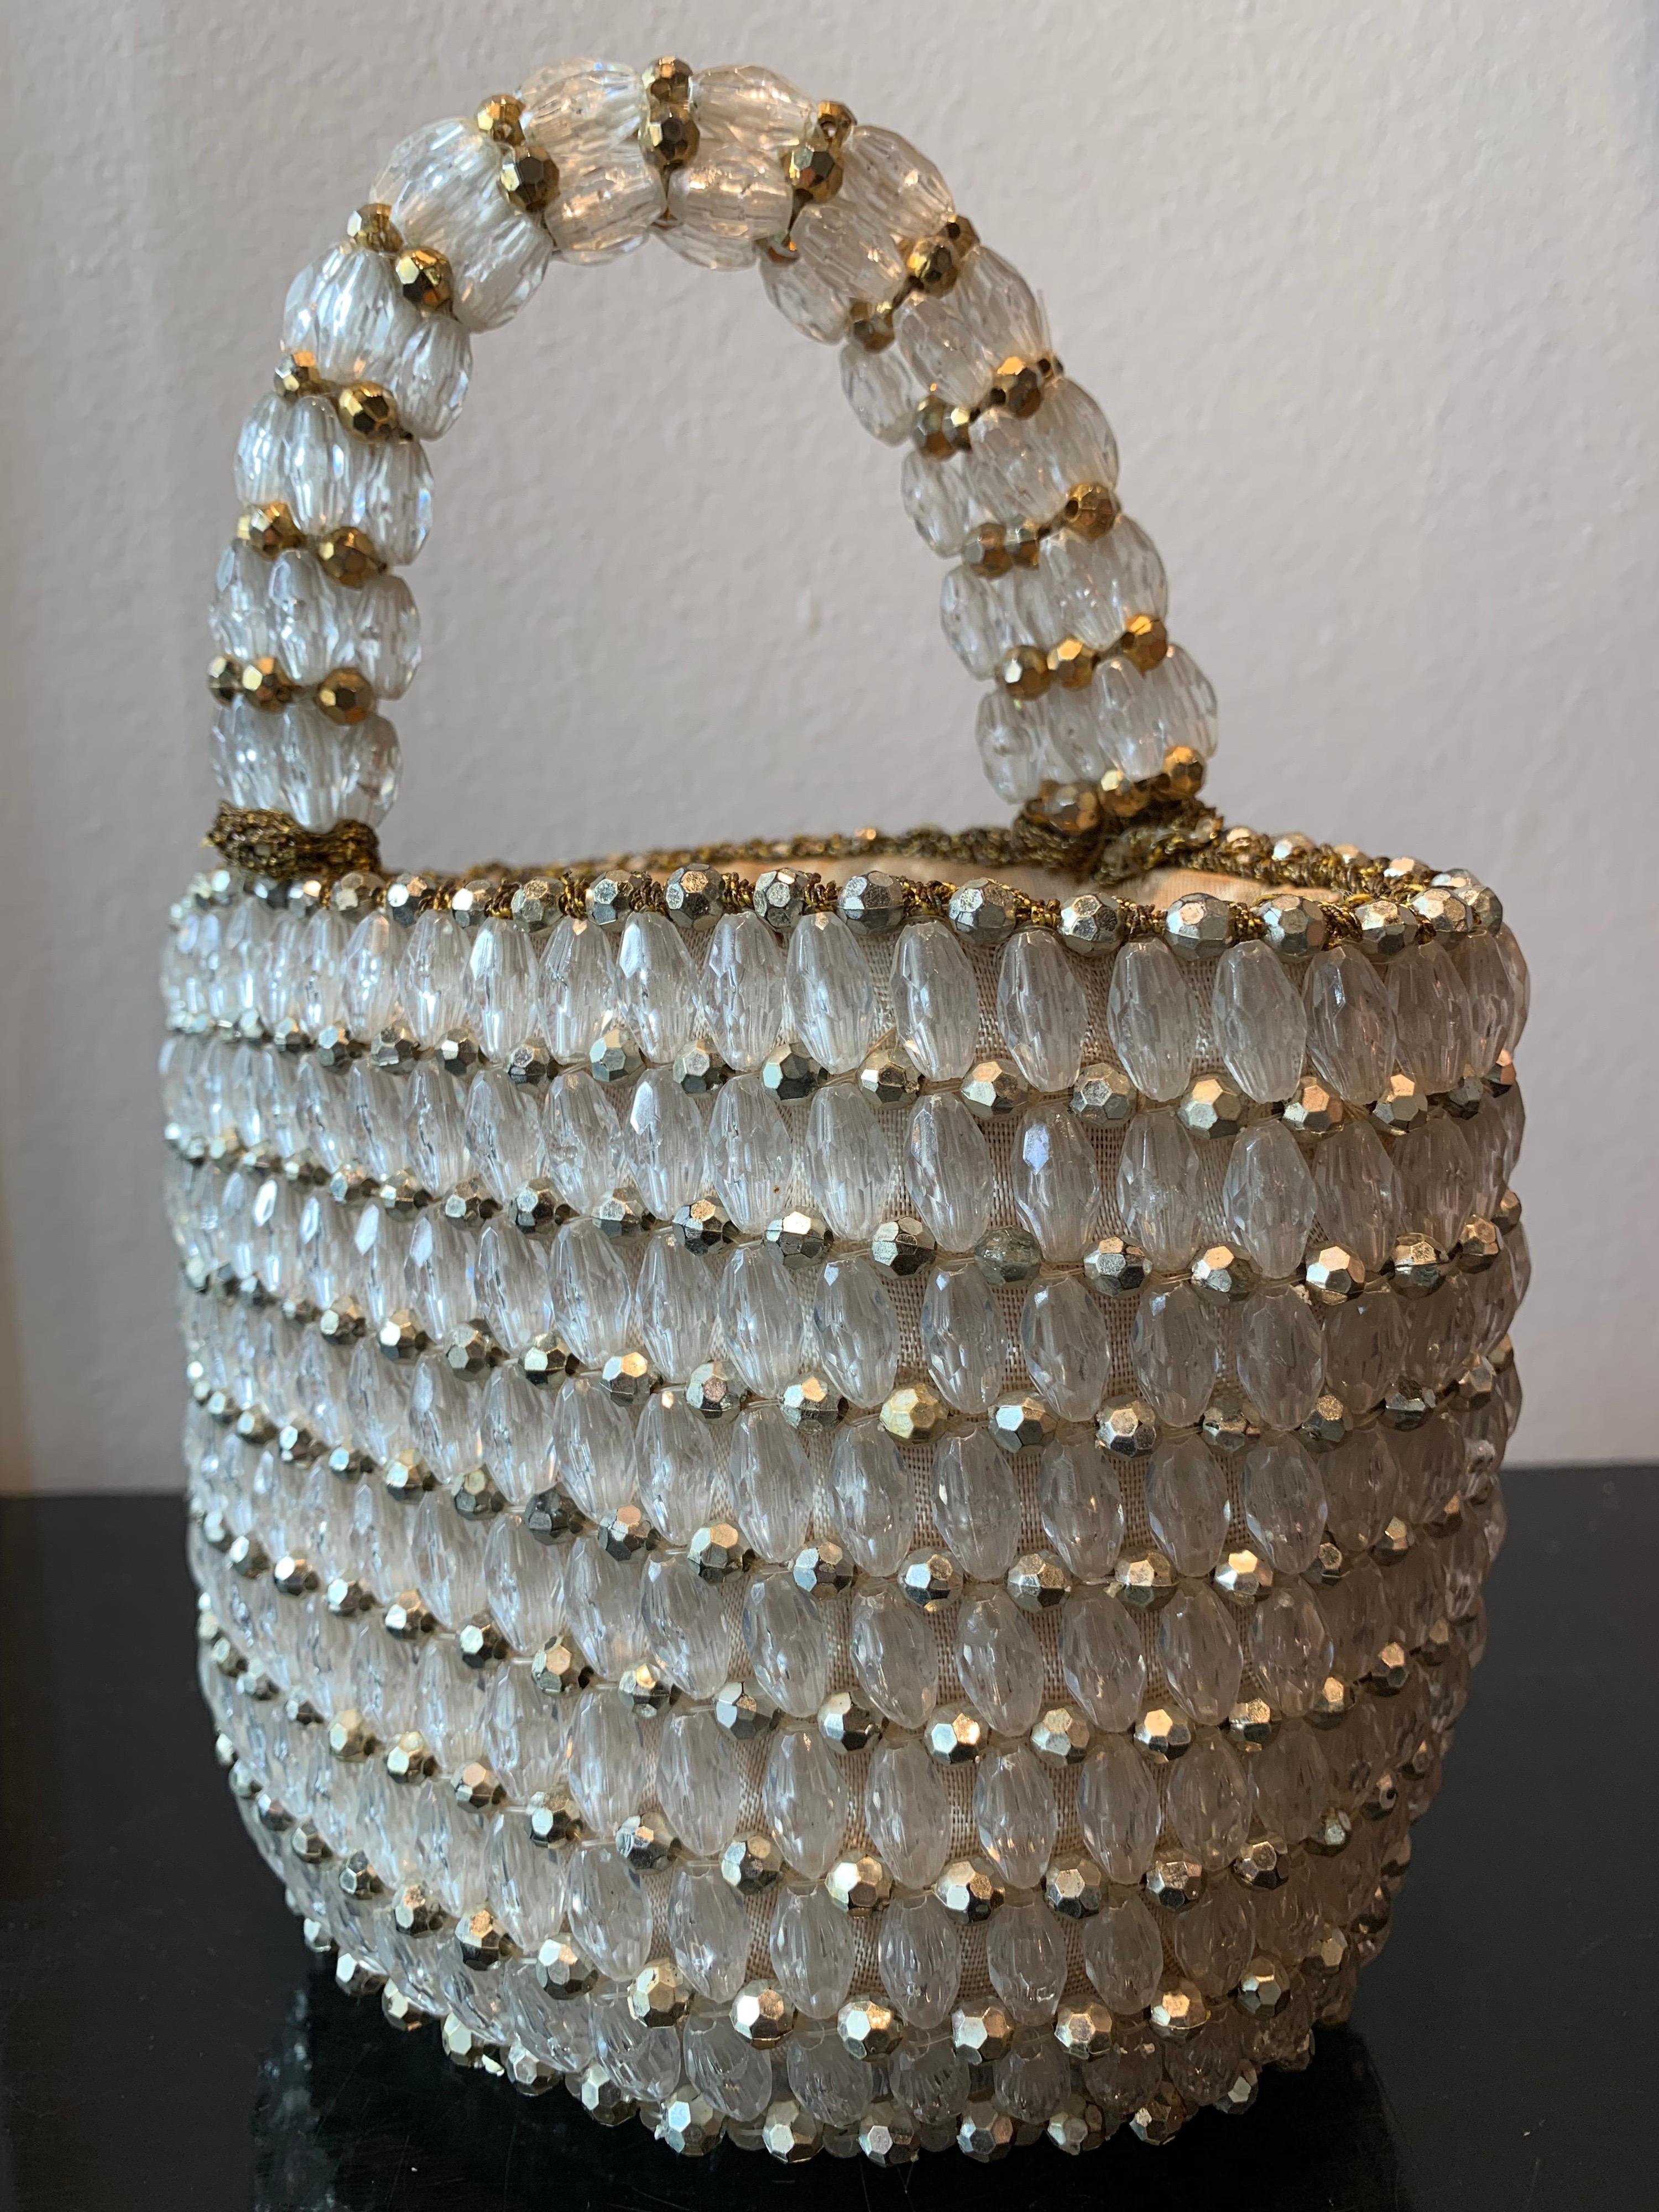 1960s Rosenfeld Italian Lucite Beaded Resort Hand Basket Purse W/ Lamé Crochet  In Excellent Condition For Sale In Gresham, OR